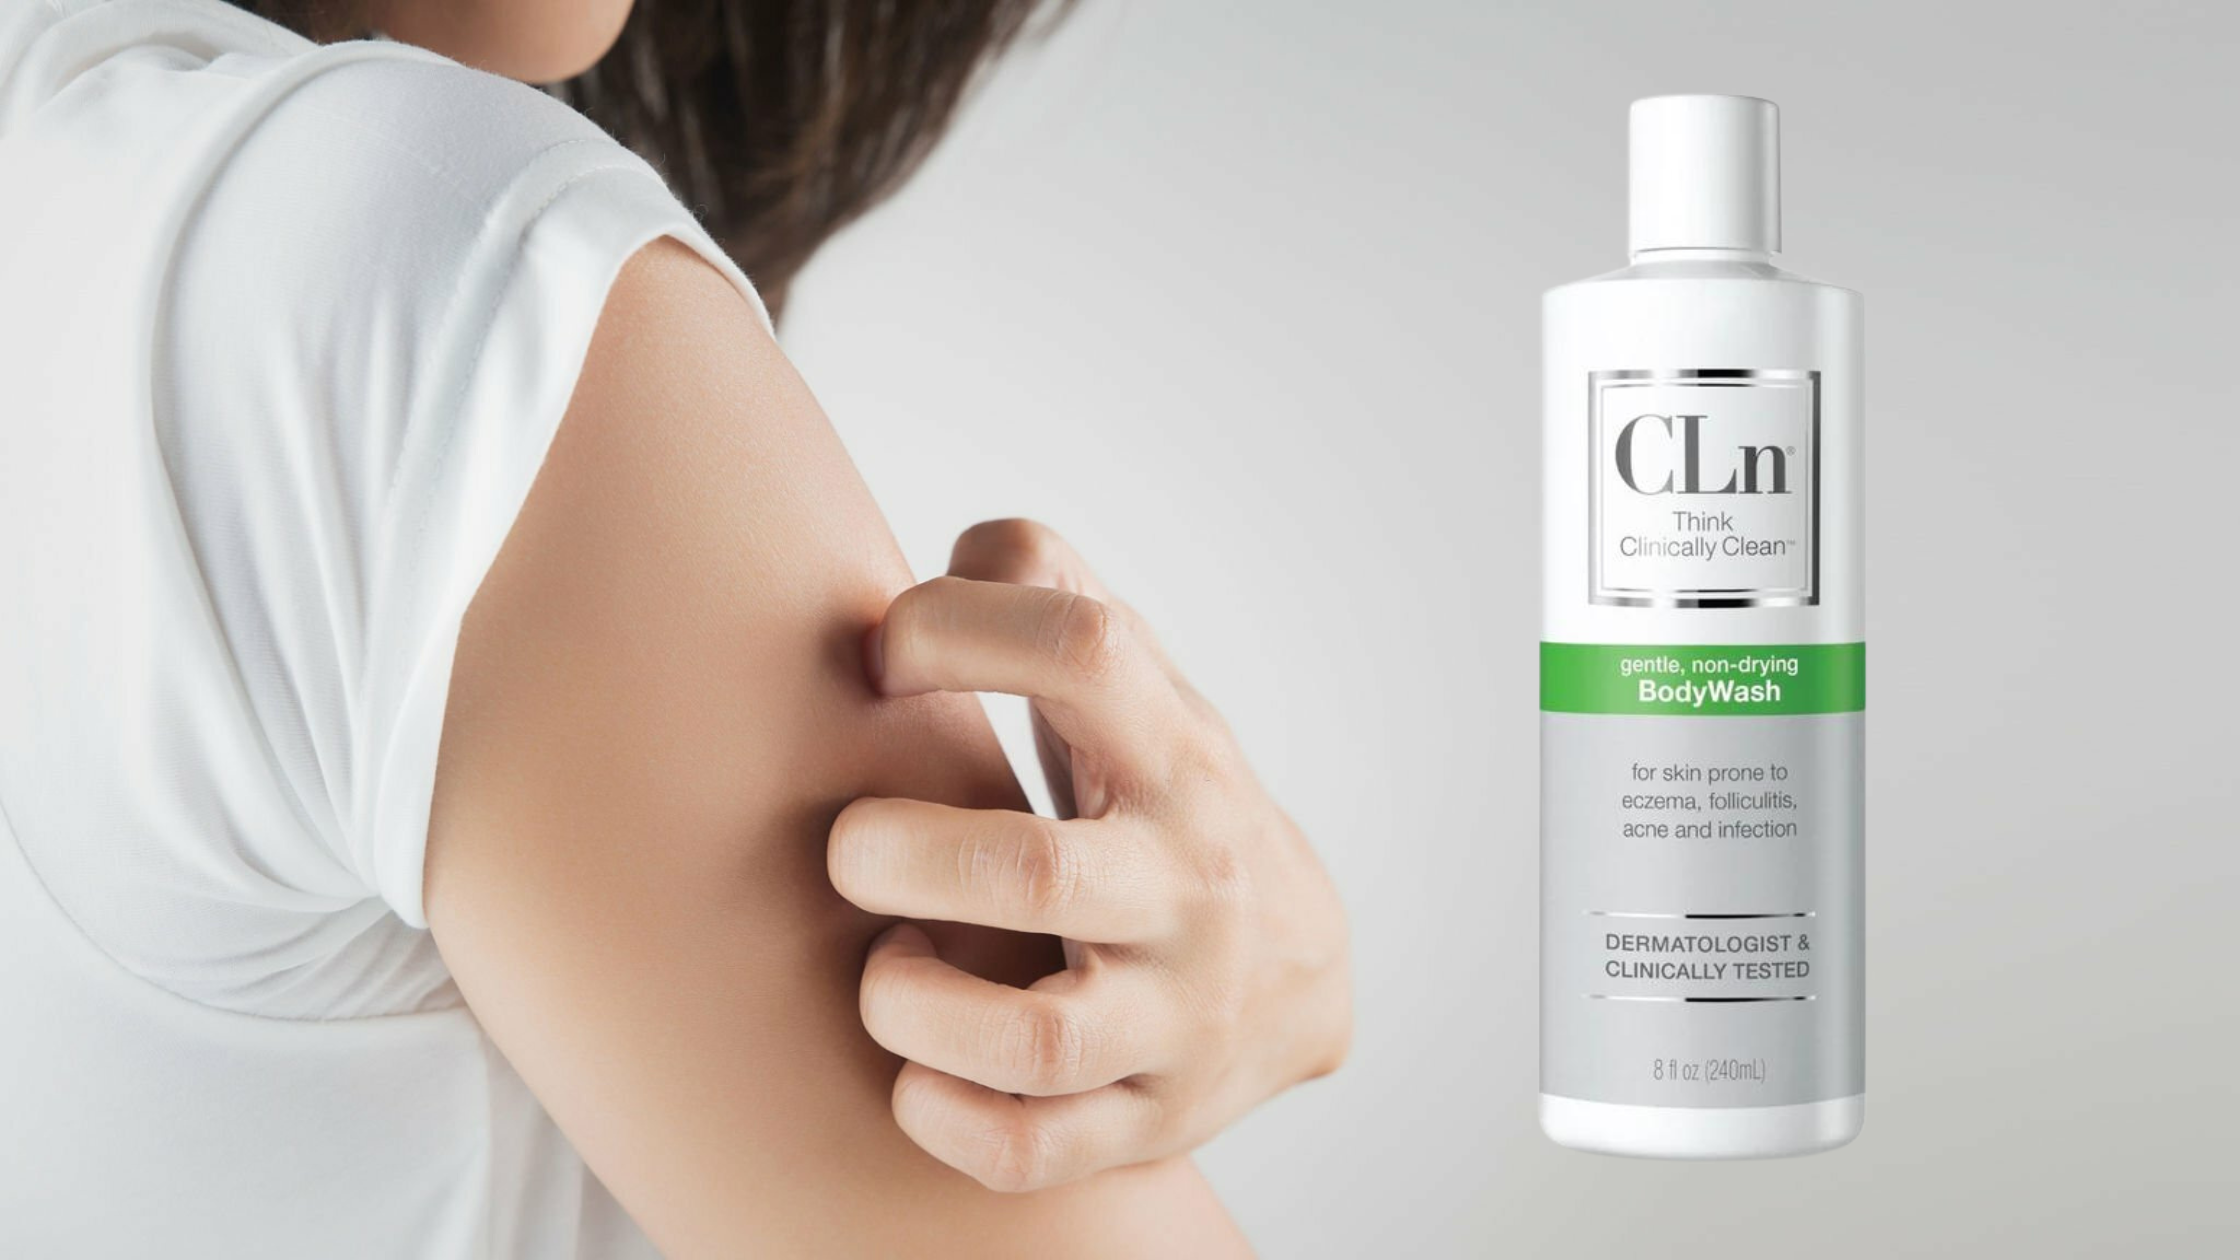 CLn body wash can help individuals that suffer from eczema and chronic skin infections